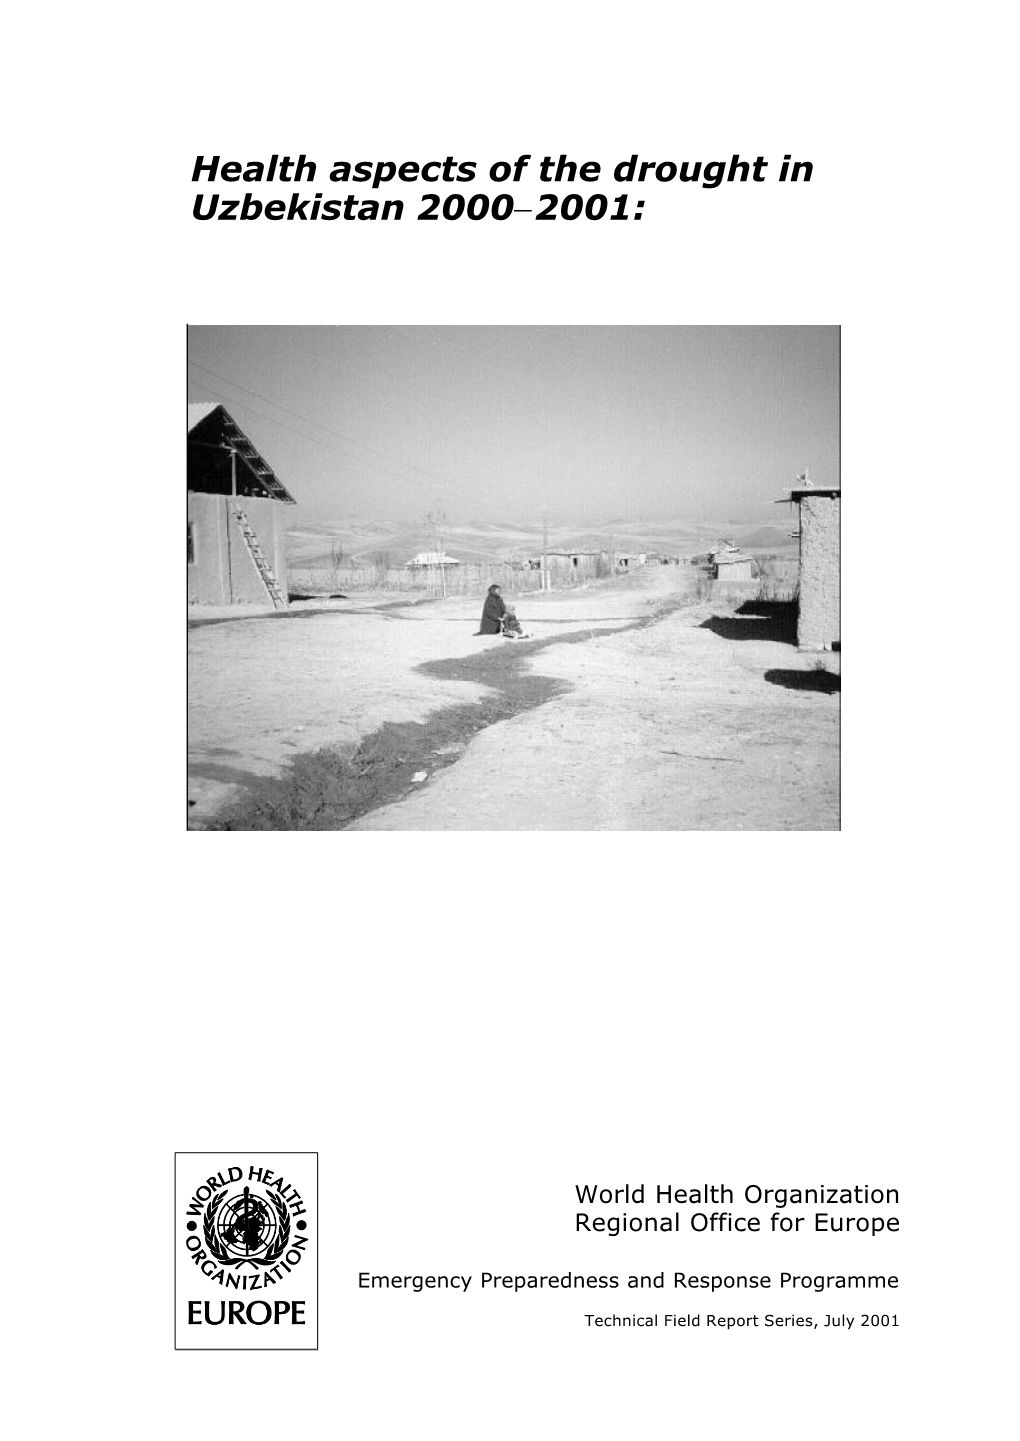 Health Aspects of the Drought in Uzbekistan 2000−2001